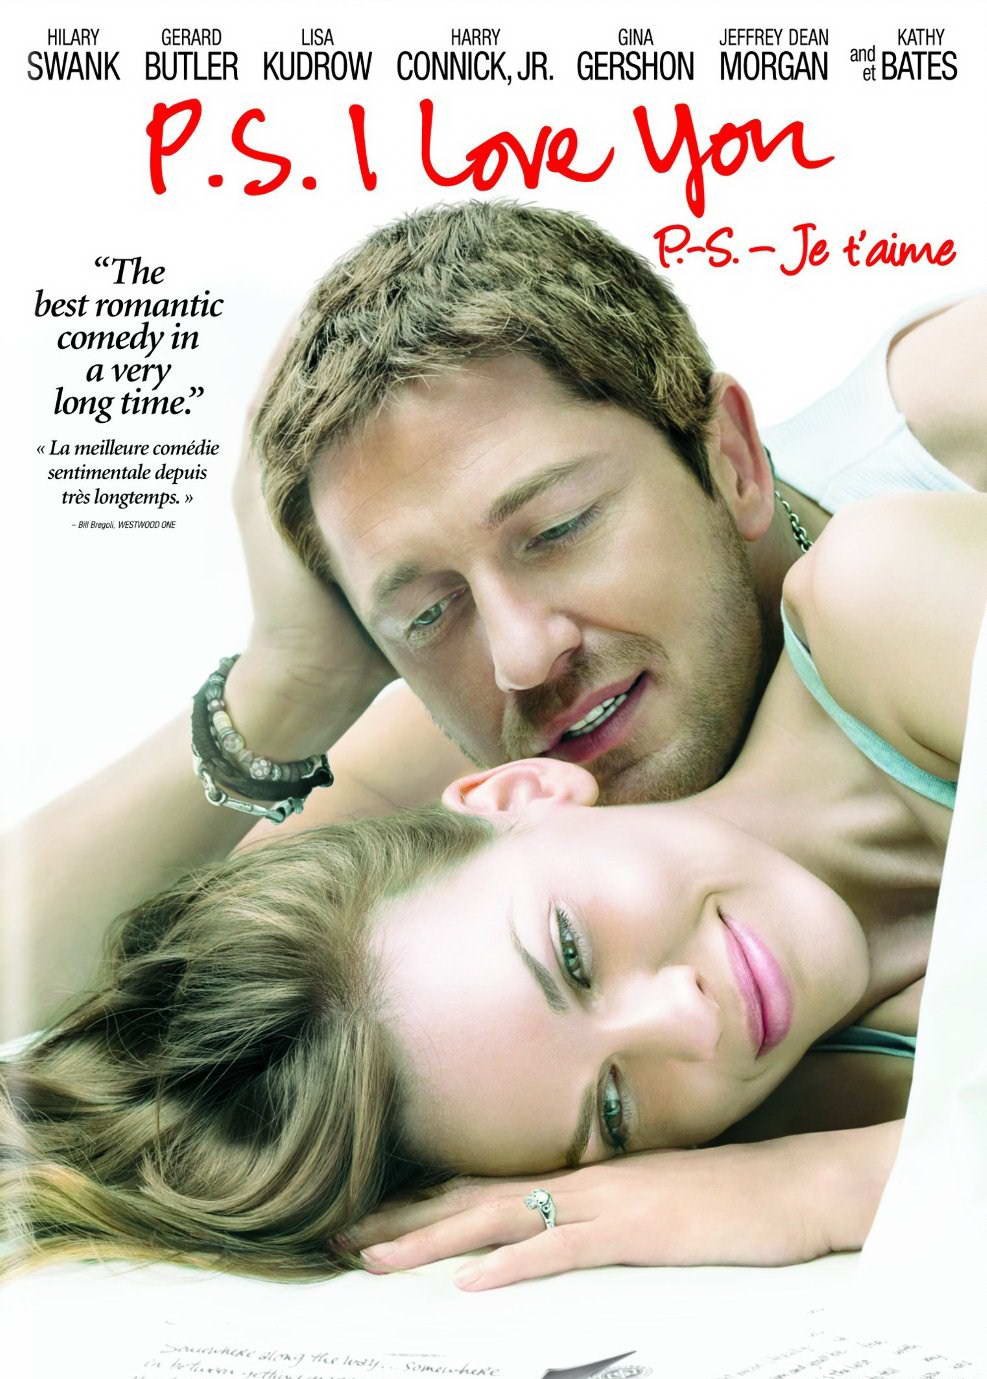 http://www.freemovieposters.net/posters/p.s._i_love_you_2007_1108_poster.jpg